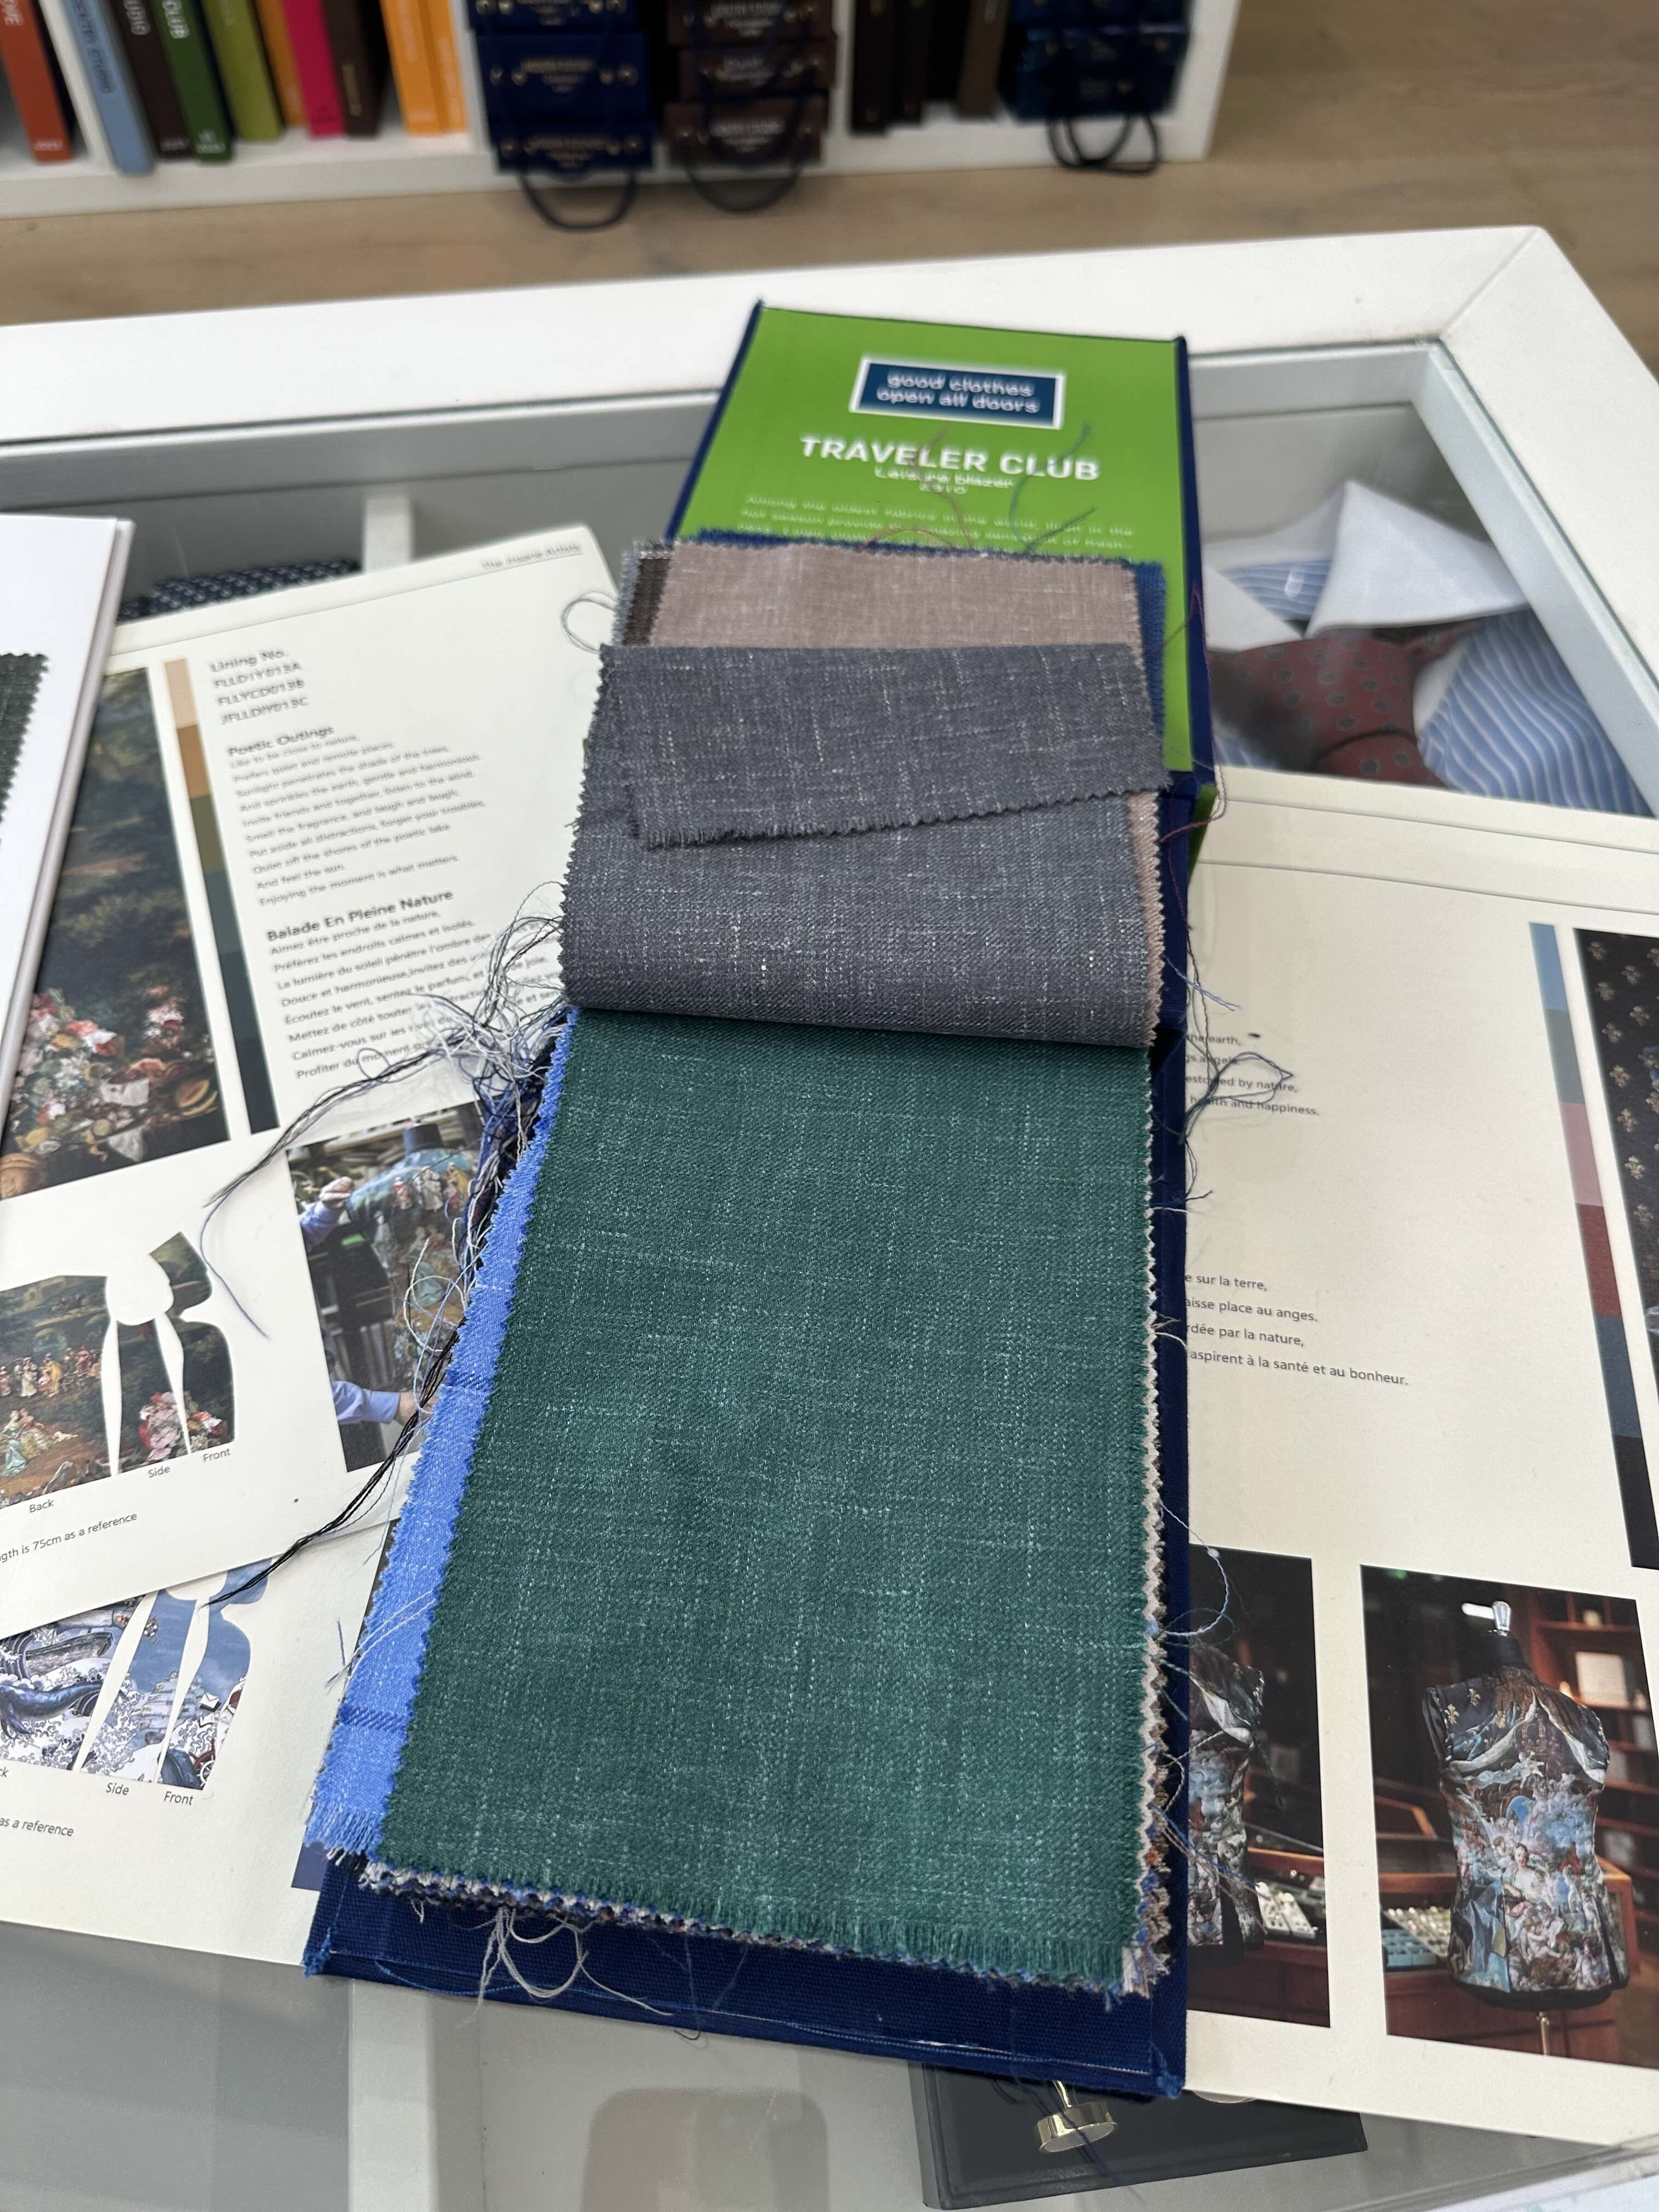 Fabric samples on display, with varying textures and patterns, laid out on a counter above brochures